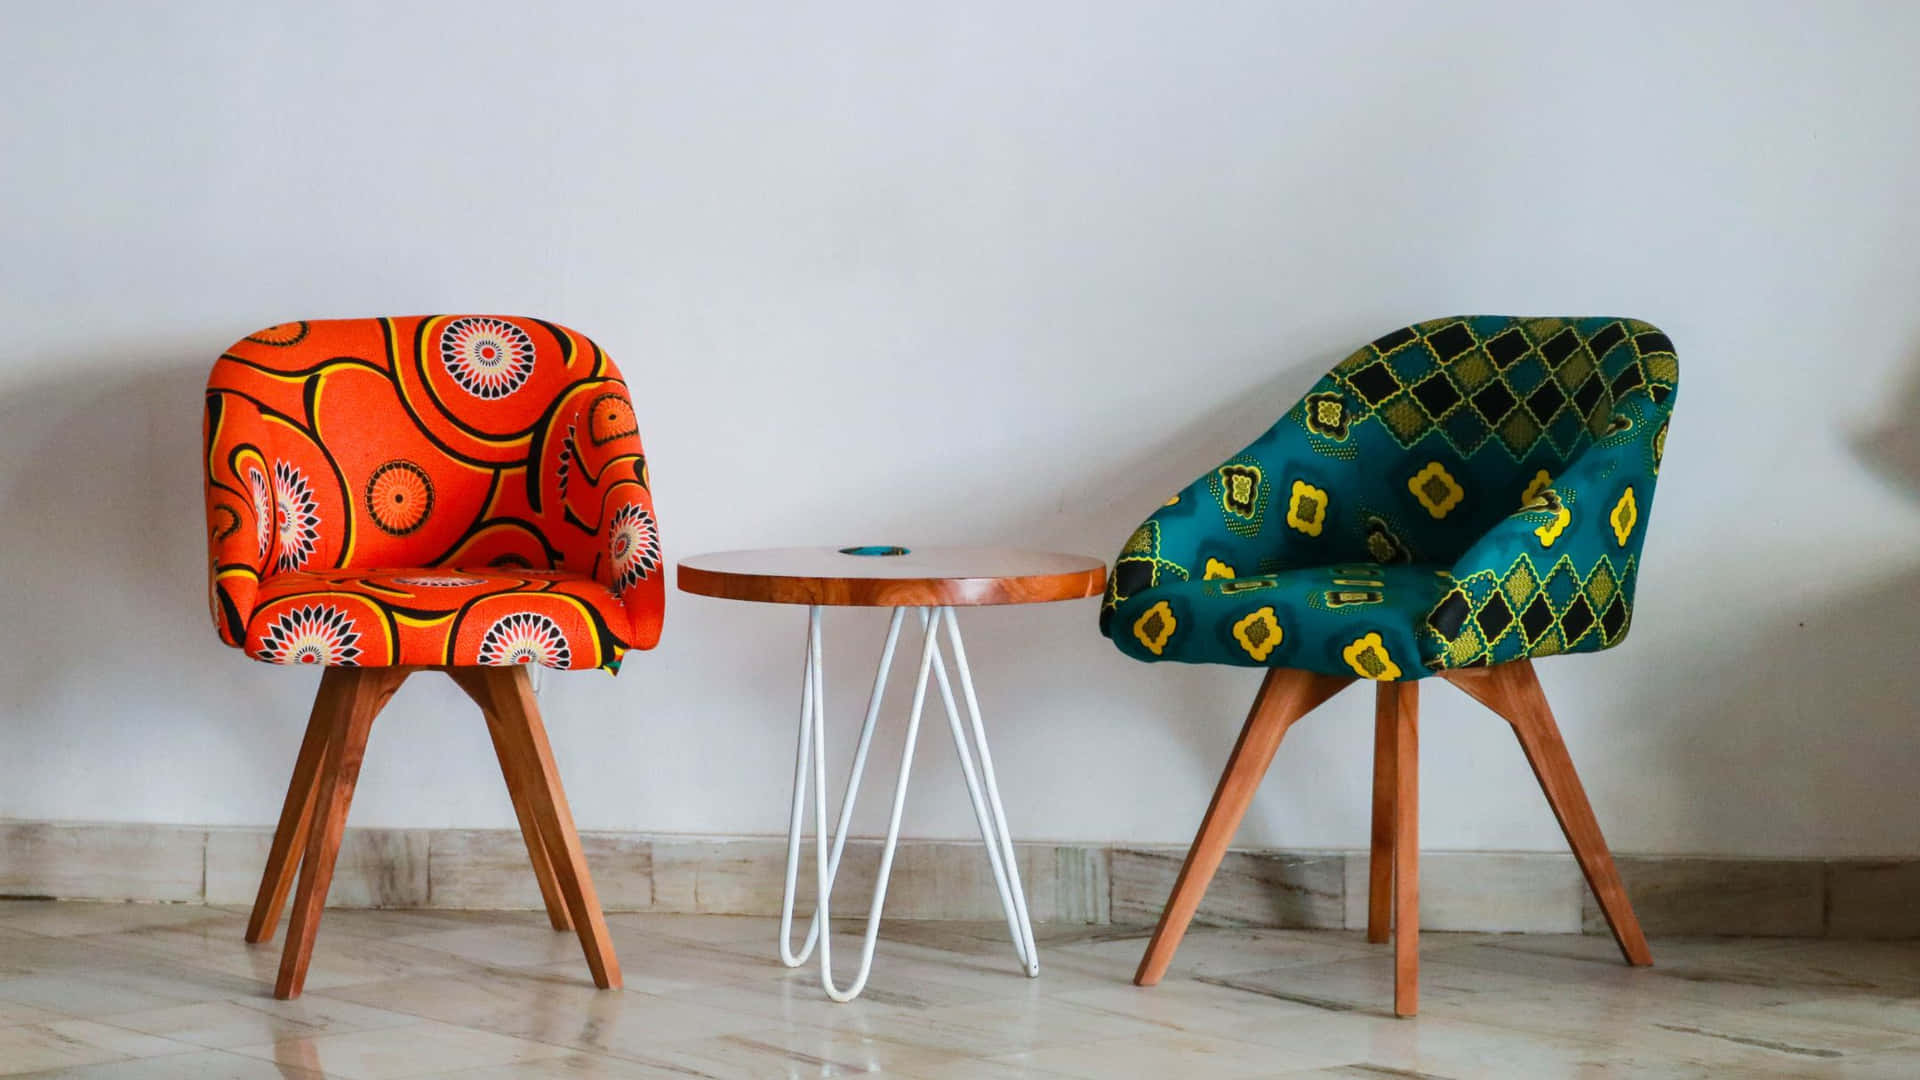 Two Chairs With Colorful Patterned Fabric And A Table